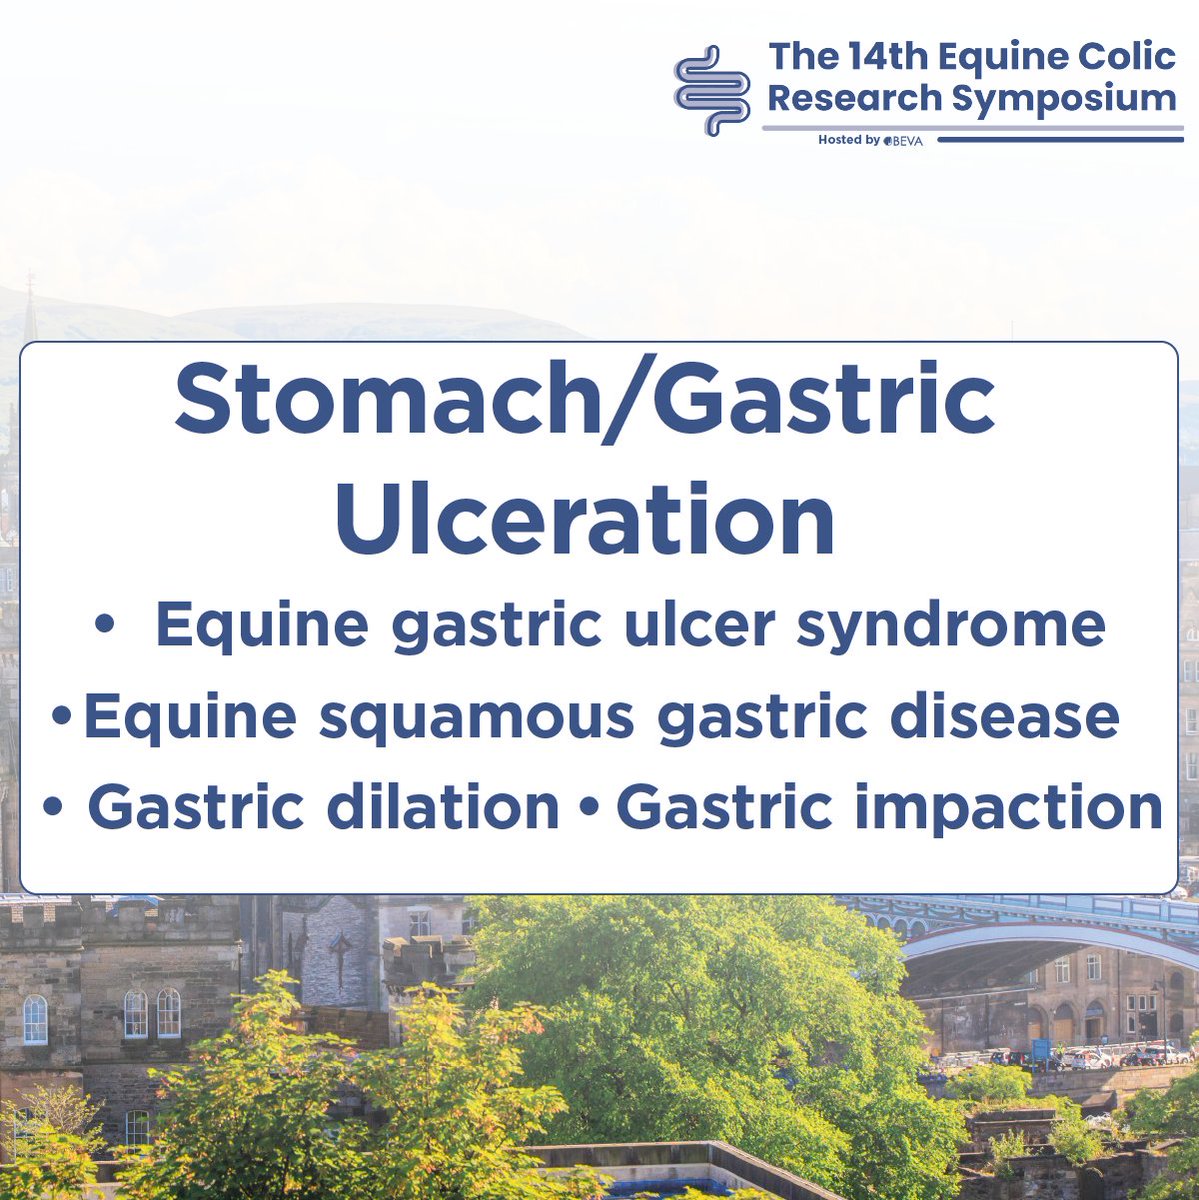 The 14th International Equine Colic Research Symposium kicks off in Edinburgh in less than 6 weeks! Tickets are selling fast but it's not too late to get yours, book now to digest from the best in equine gastrointestinal medicine! 🔗 bit.ly/47tsDvl